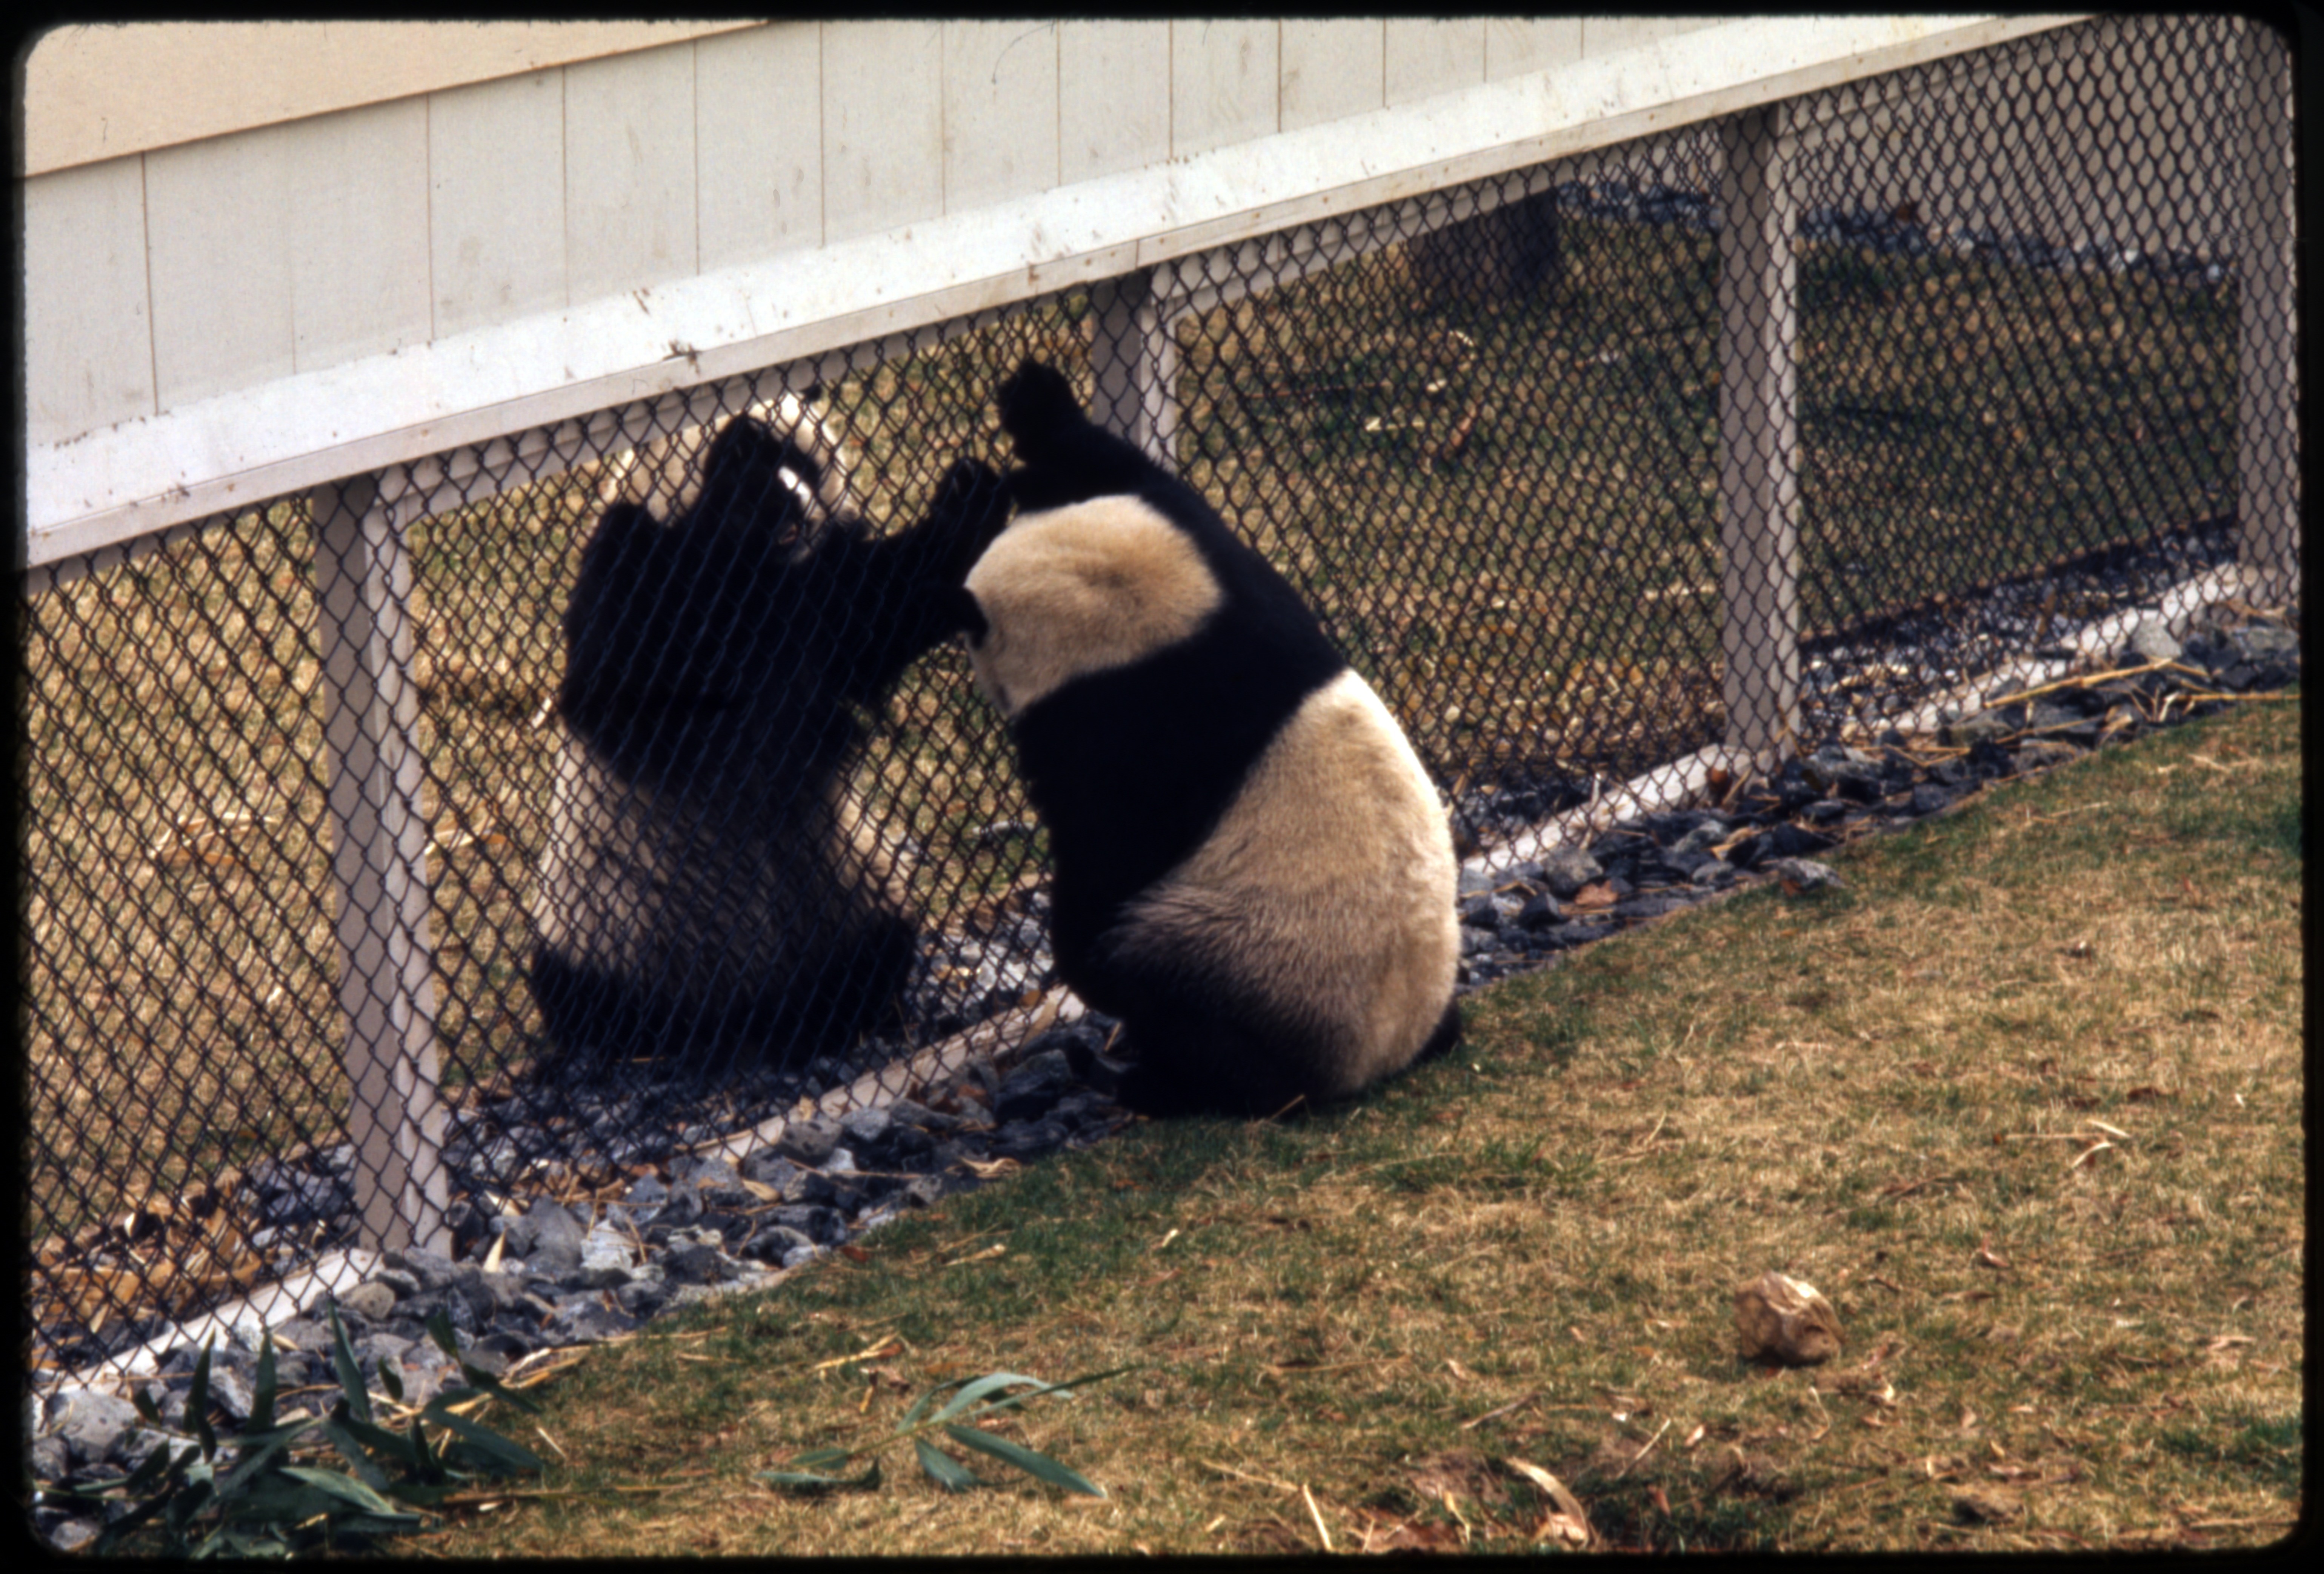 Two giant pandas face one another on different sides of the fence in their enclosure.